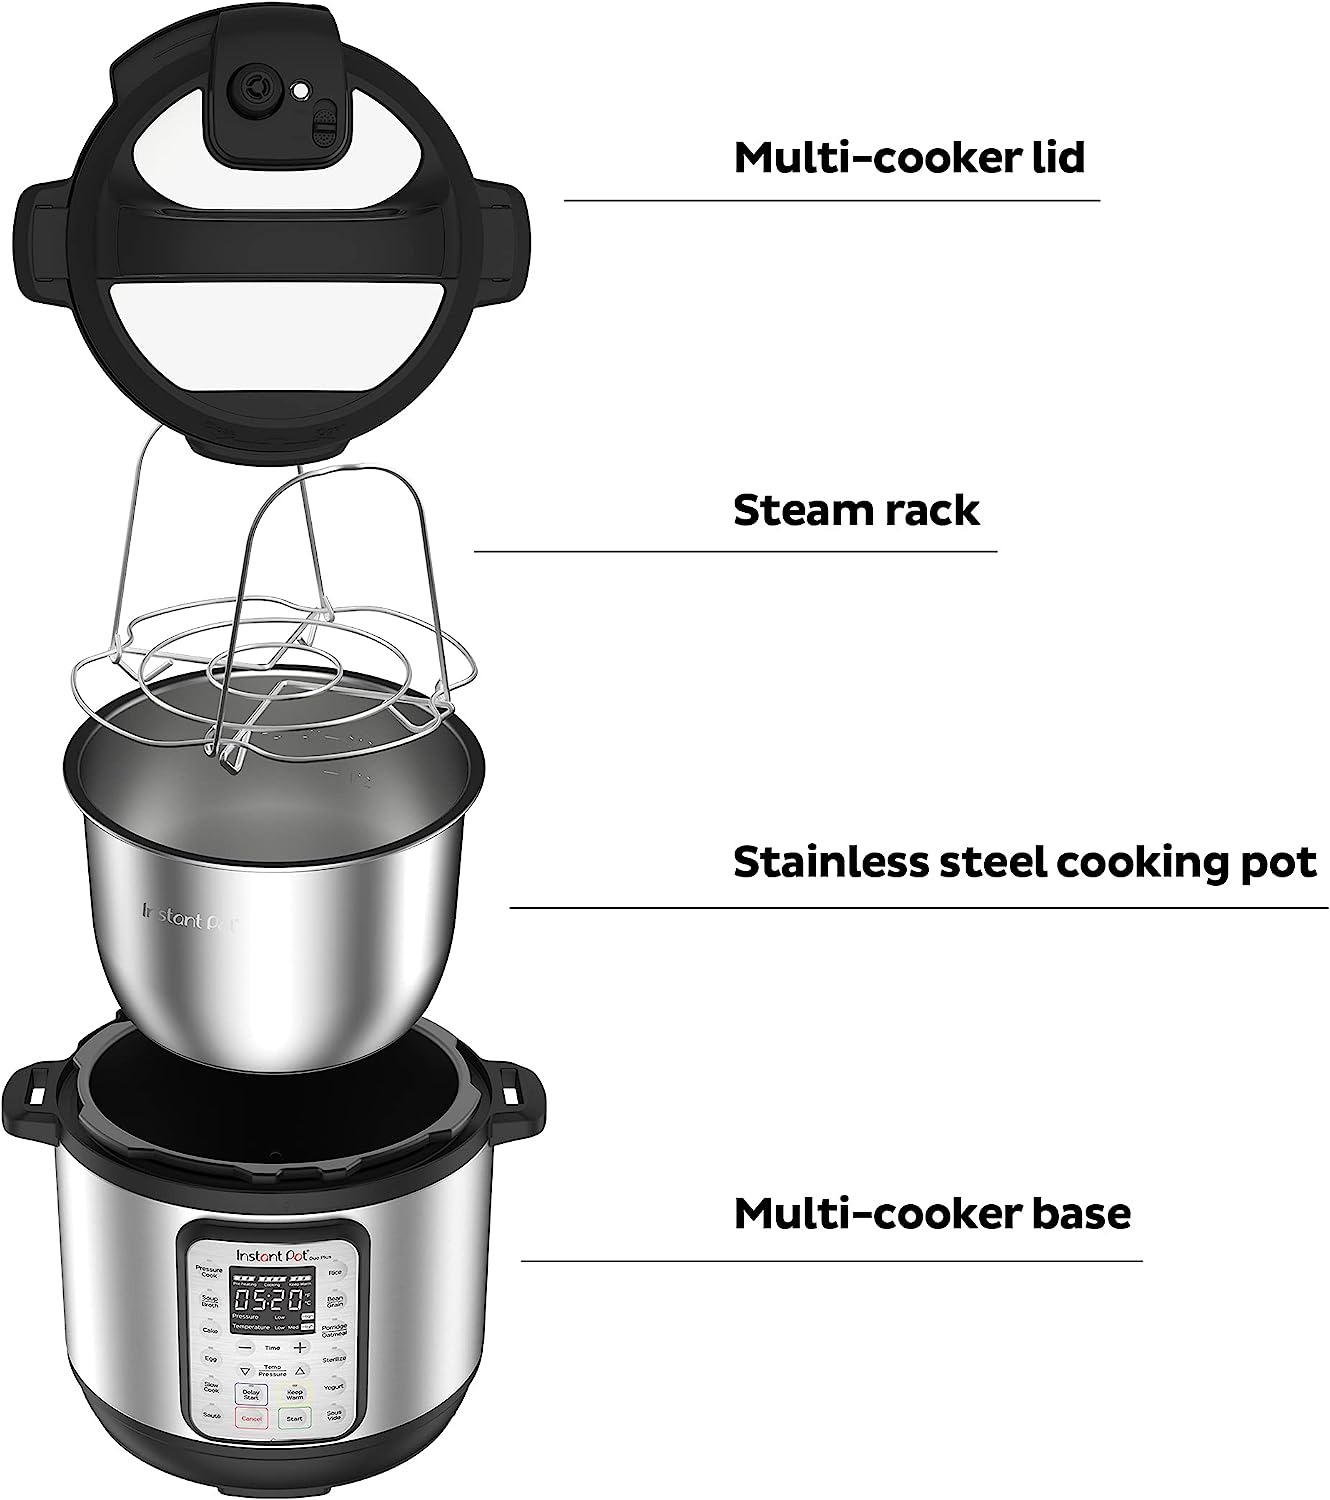 https://bigbigmart.com/wp-content/uploads/2023/06/Instant-Pot-Duo-Plus-9-in-1-Electric-Pressure-Cooker-Slow-Cooker-Rice-Cooker-Steamer-Saute-Yogurt-Maker-Warmer-Sterilizer-Includes-Free-App-with-over-1900-Recipes-Stainless-Steel-6-Quart7.jpg